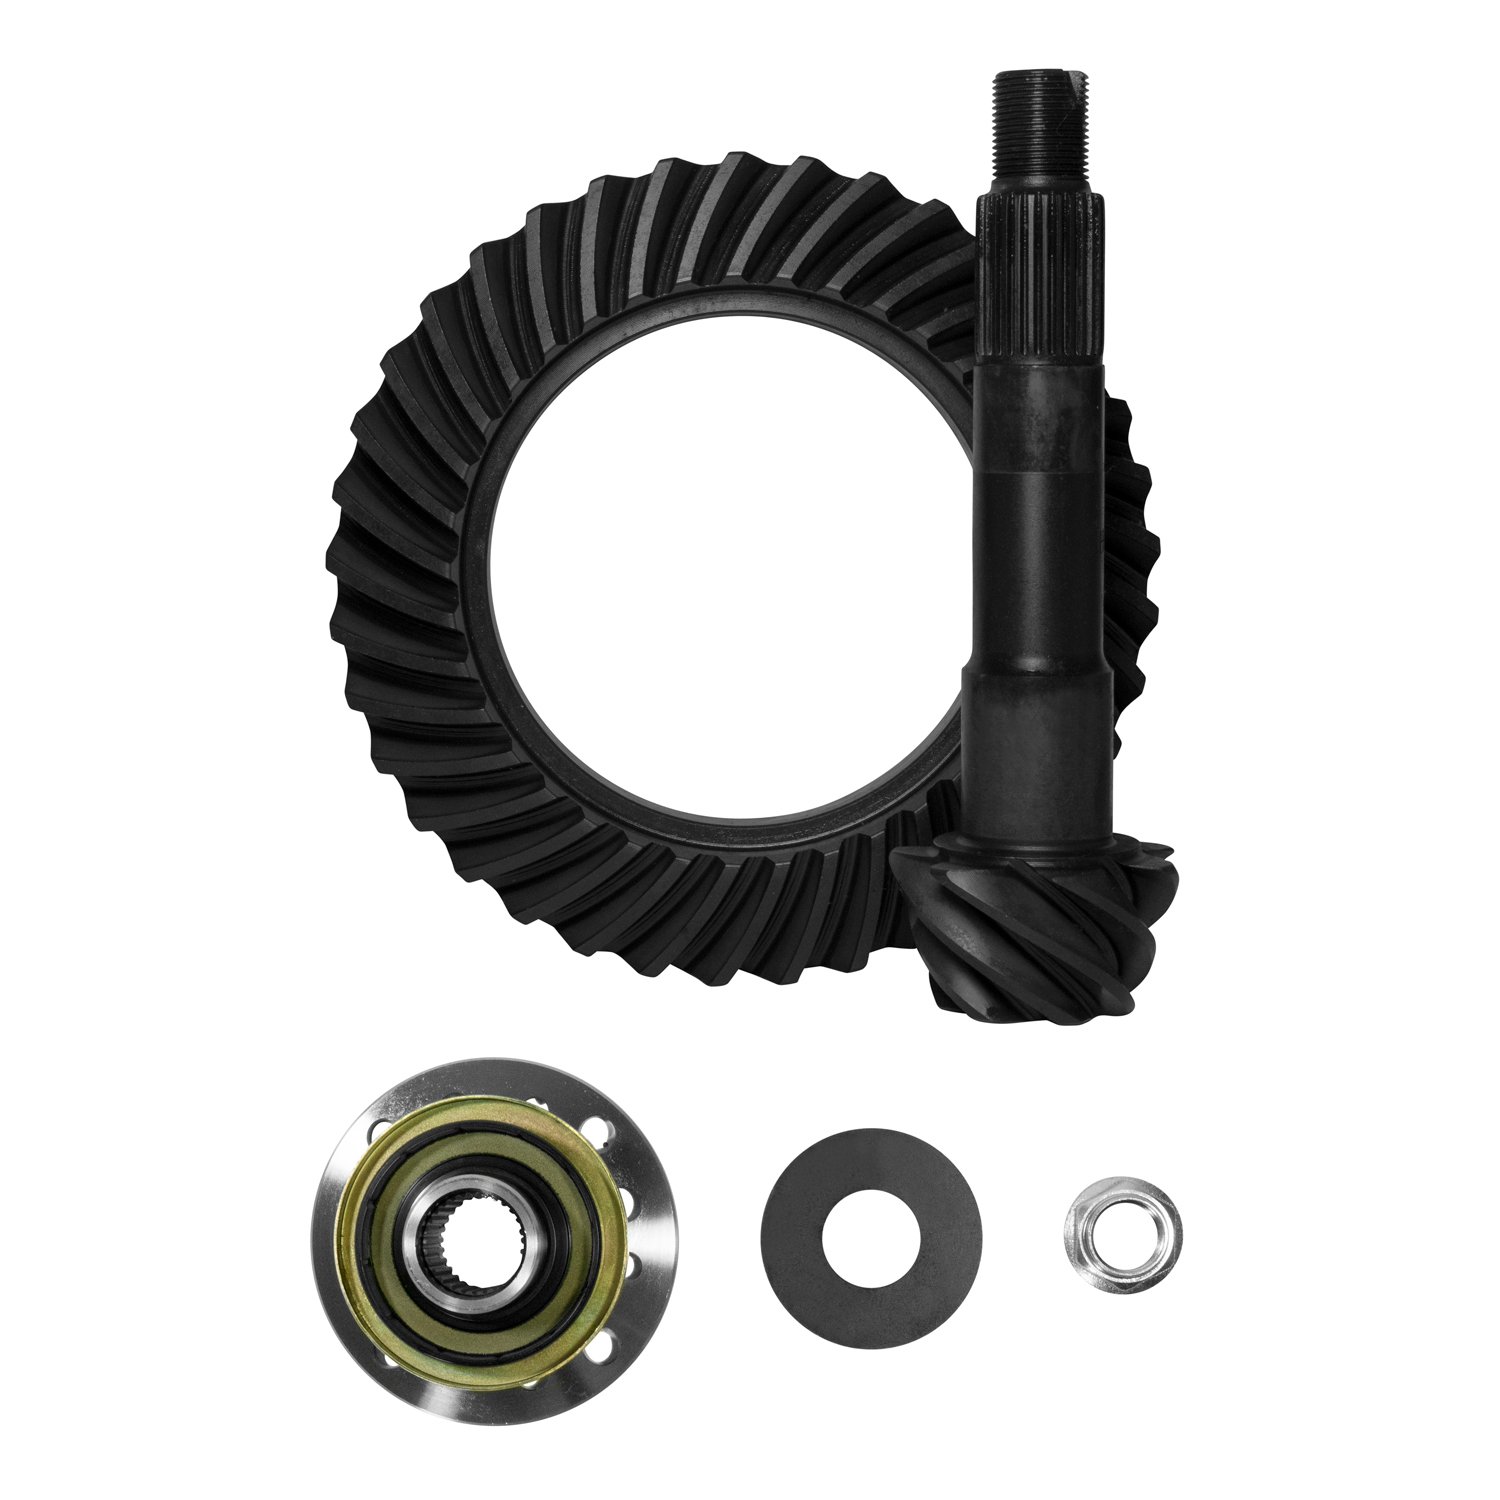 USA Standard ZG T8-529K Ring & Pinion Gear Set, For Toyota 8 in., 5.29 Ratio